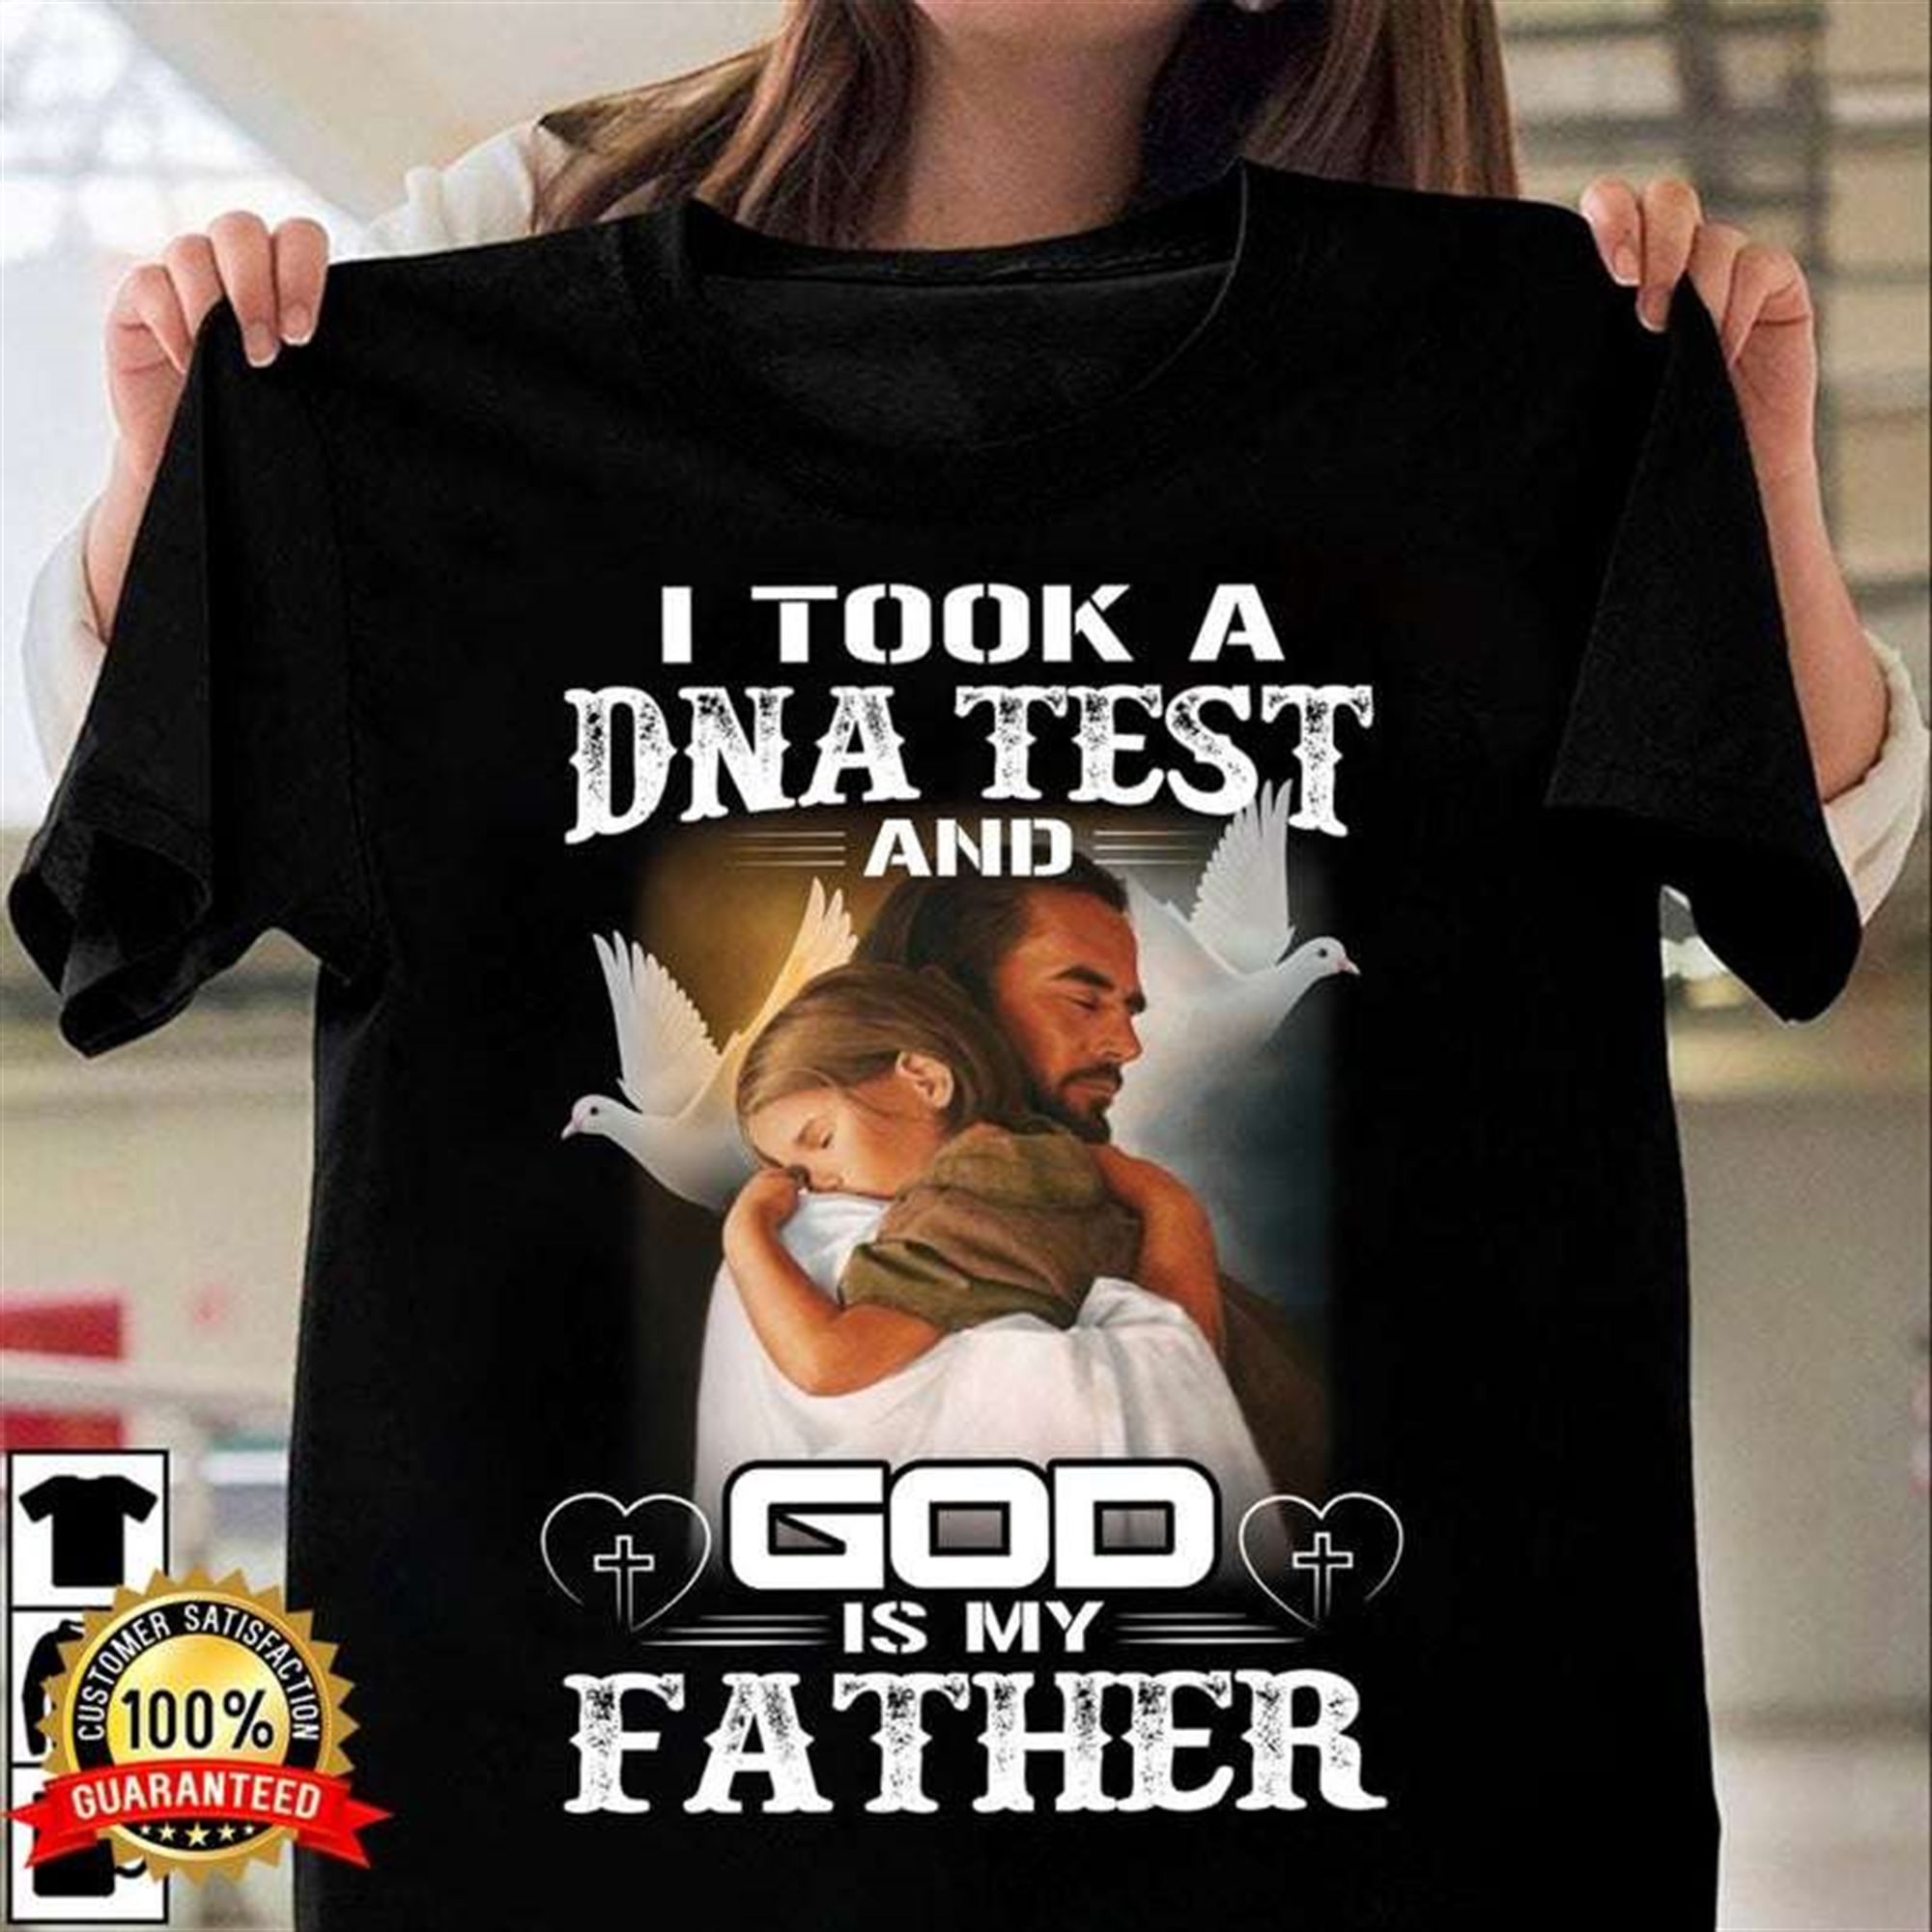 Jesus Christ I Took A Dna Test And God Is My Father T Shirt Full Size Up To 5xl